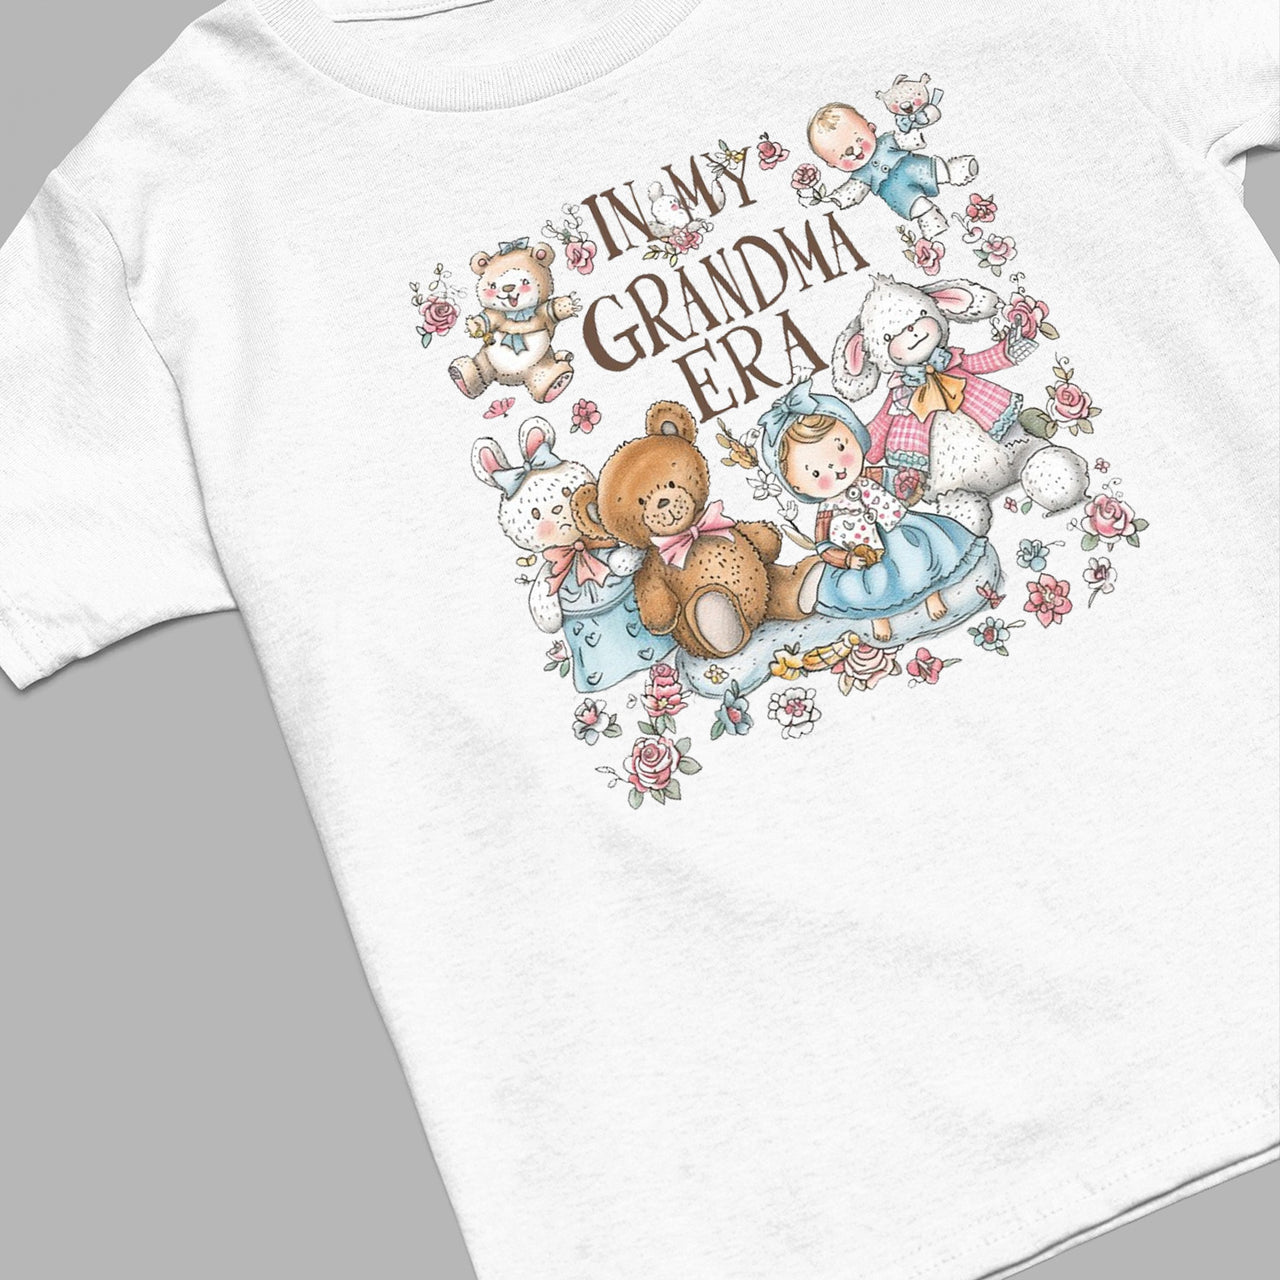 In My Grandma Era T-Shirt, Cute Toys Shirt, Celebrate Mom, Nana Shirt, Grandma Hoodie, Grandma Shirt, Mother's Day Gift For Grandma, Happy Mother's Day 01